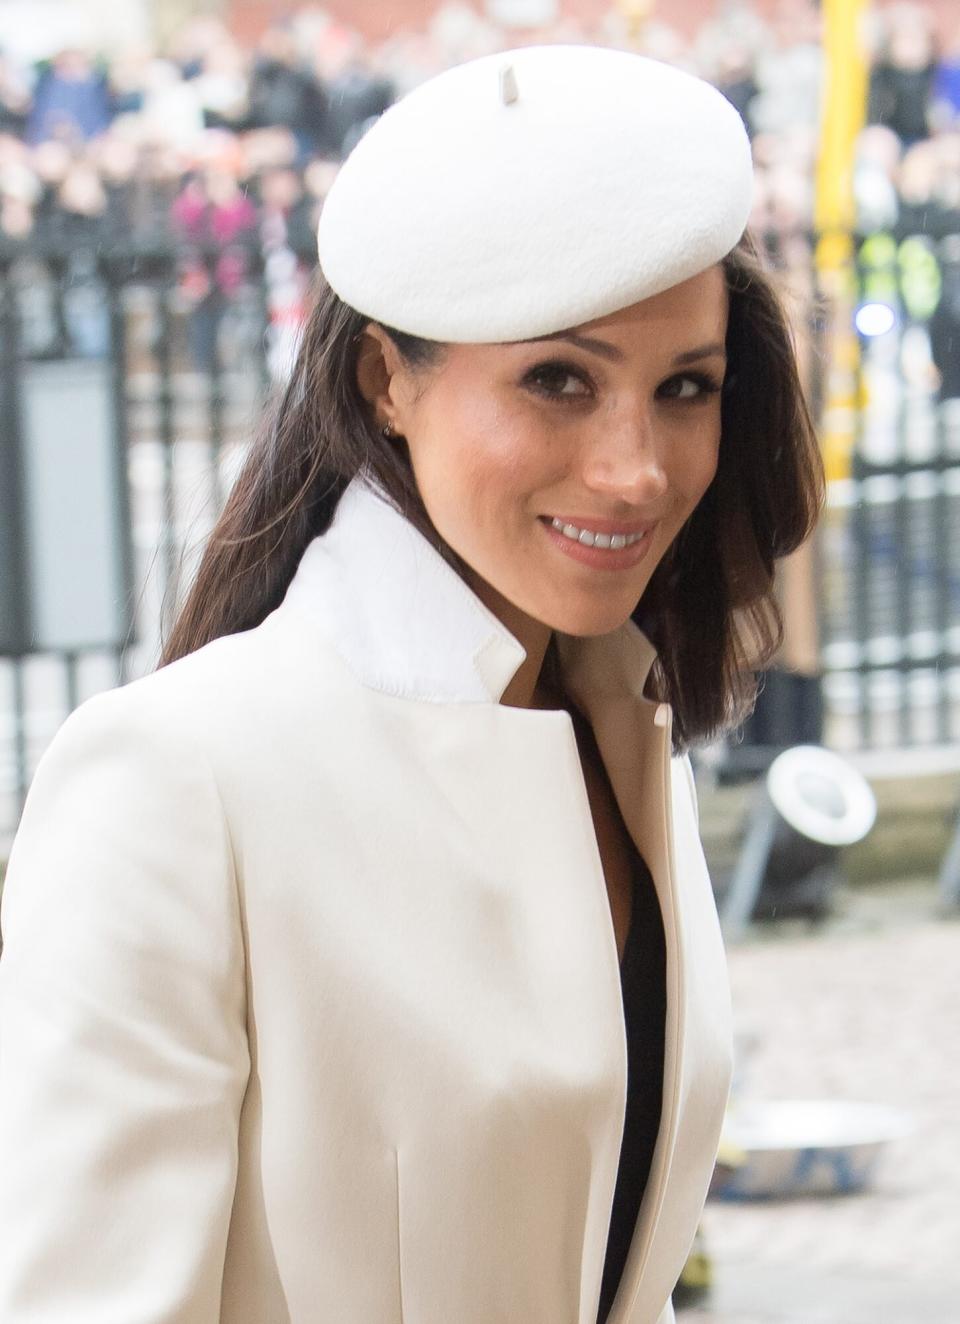 Meghan Markle attends the 2018 Commonwealth Day service at Westminster Abbey on March 12, 2018